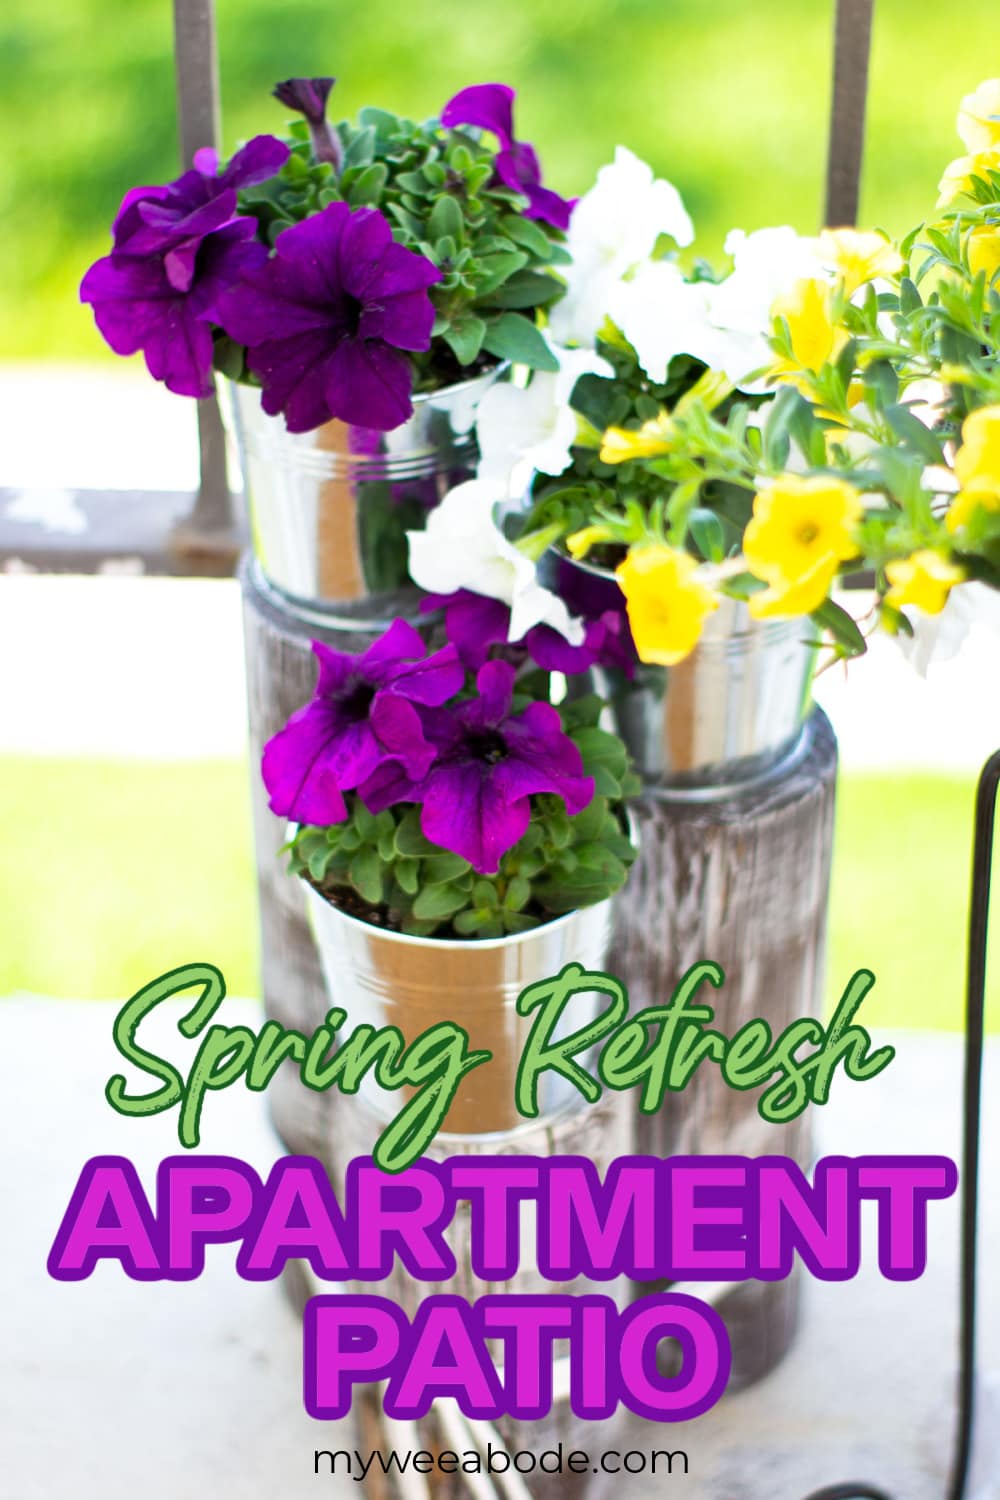 Adding simple and budget-friendly items and flowers to your tiny patio or porch can make a big difference for the spring season. Check out this apartment patio spring refresh! #myweeabode #apartmentlife #smallpatio